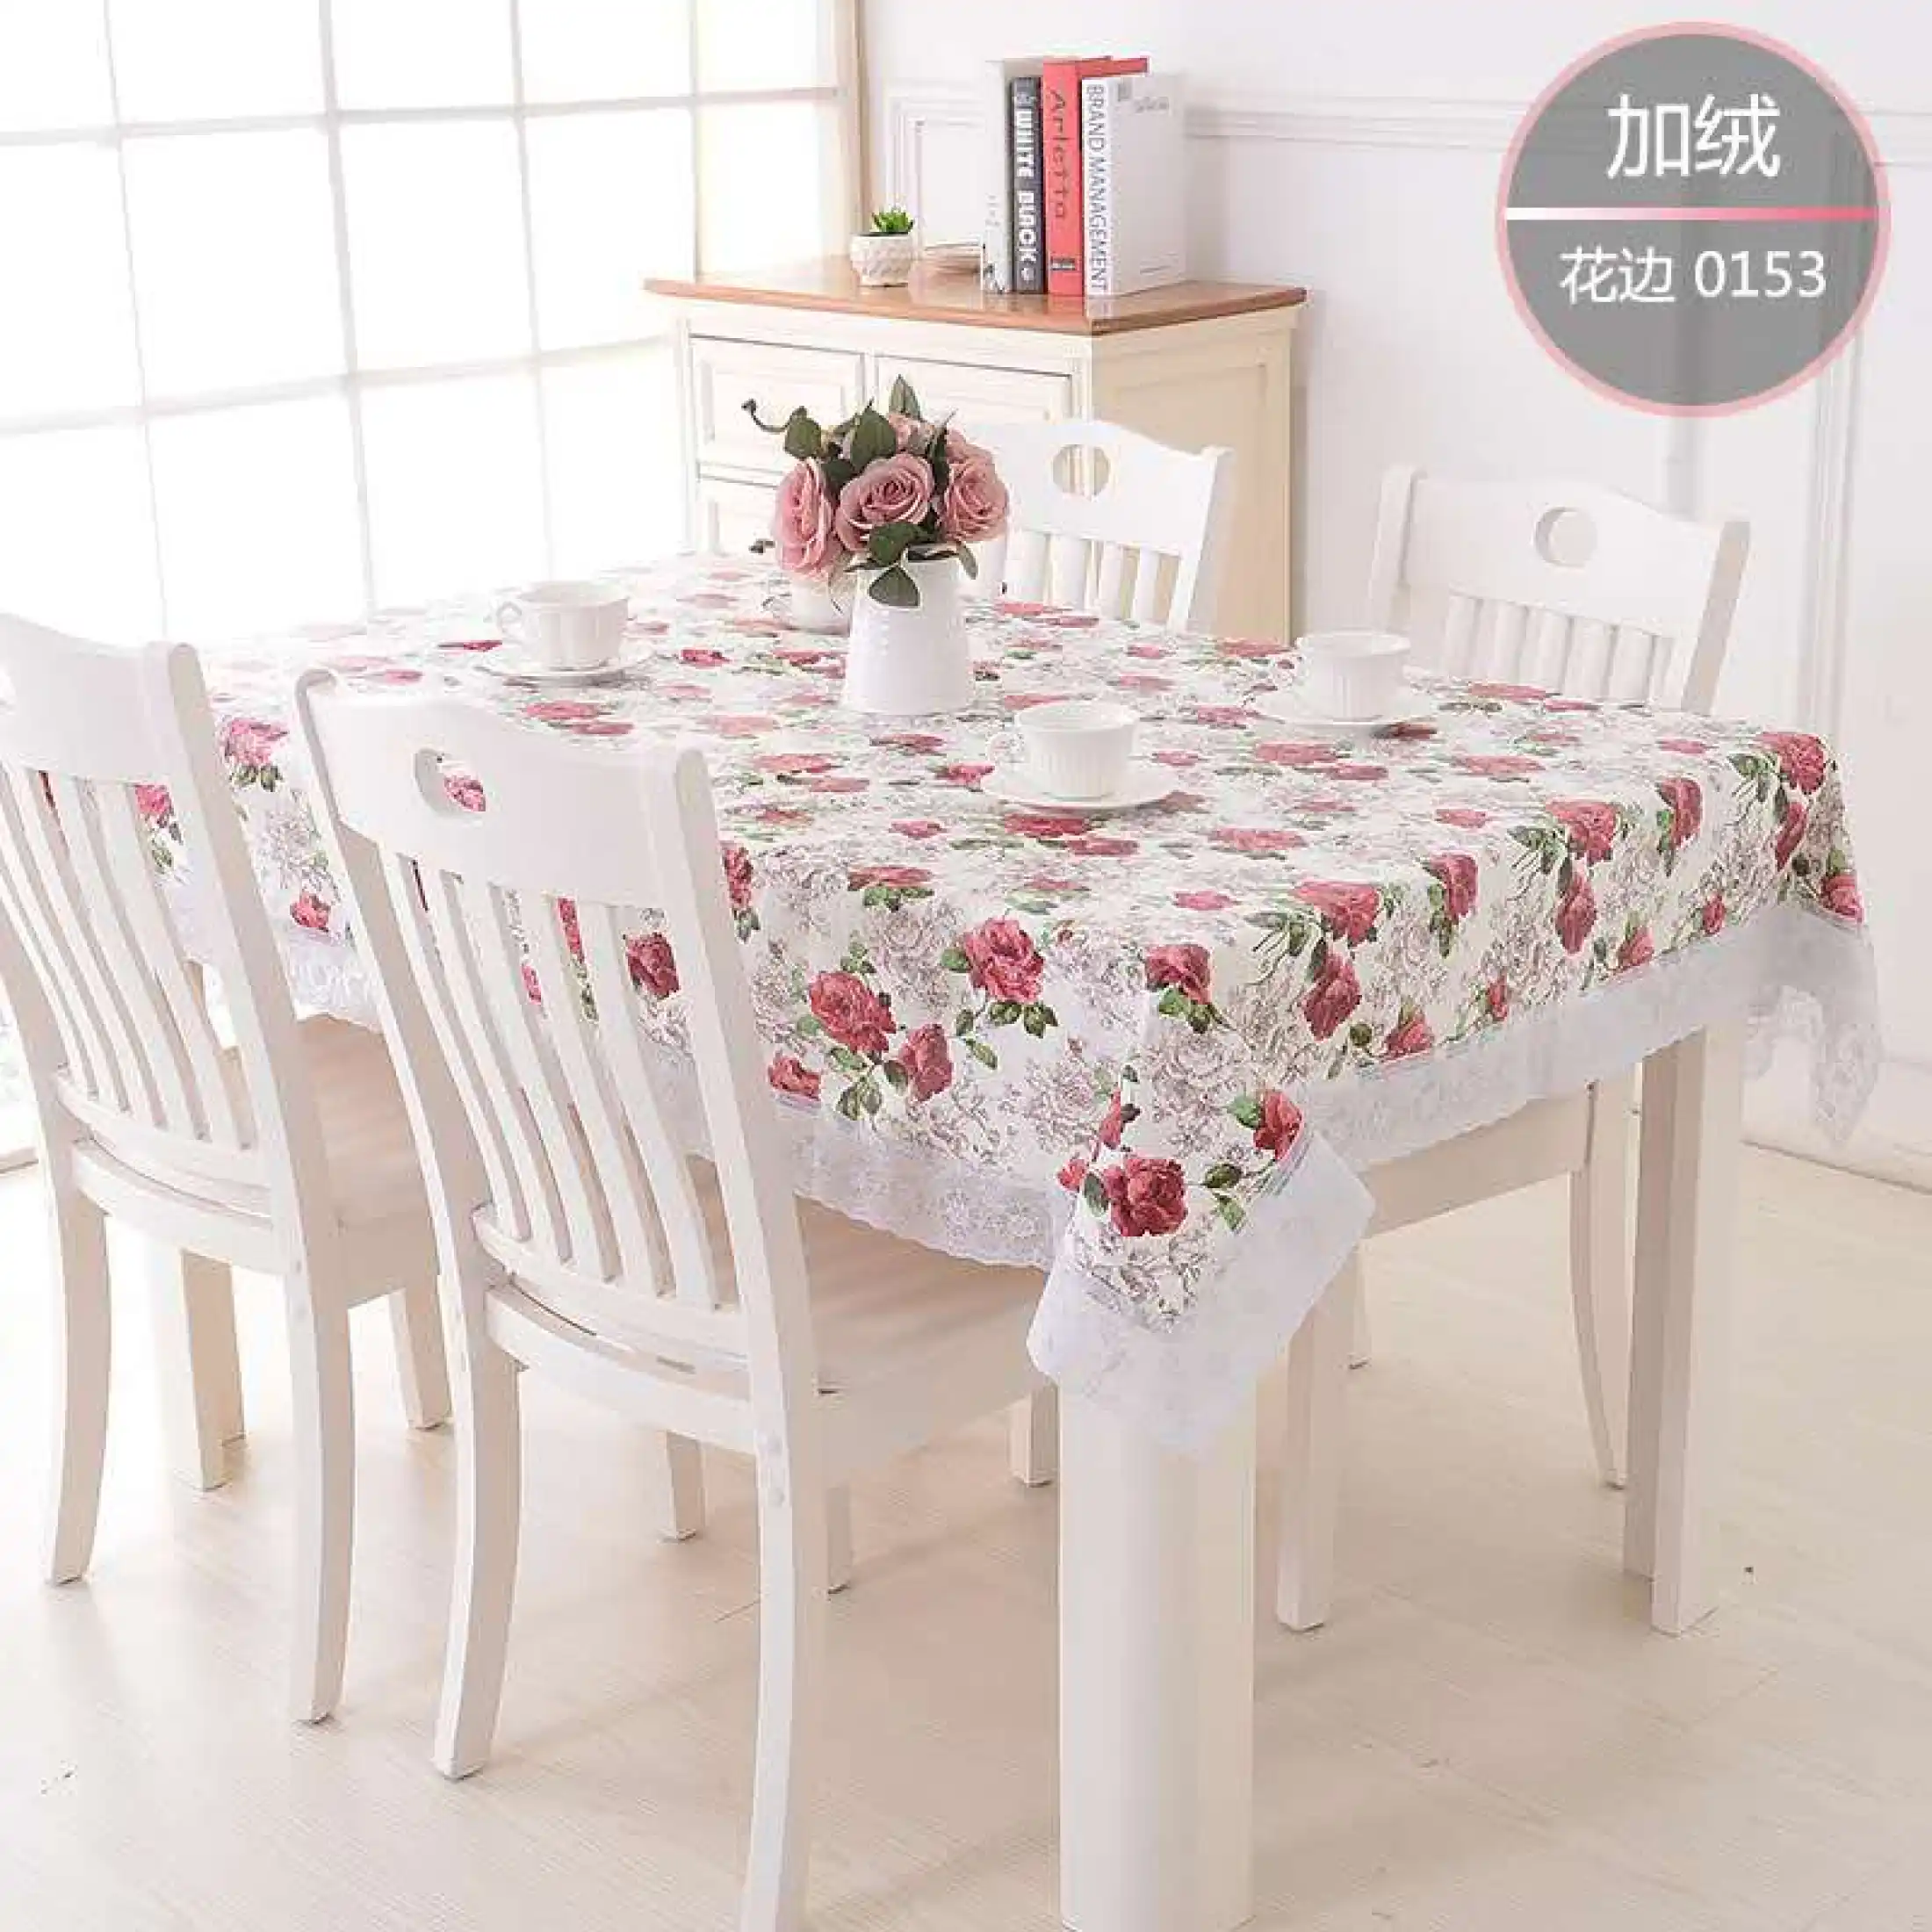 Dining Kitchen Easy Clean PVC Waterproof Oil Proof Table Cloth Cover Protector